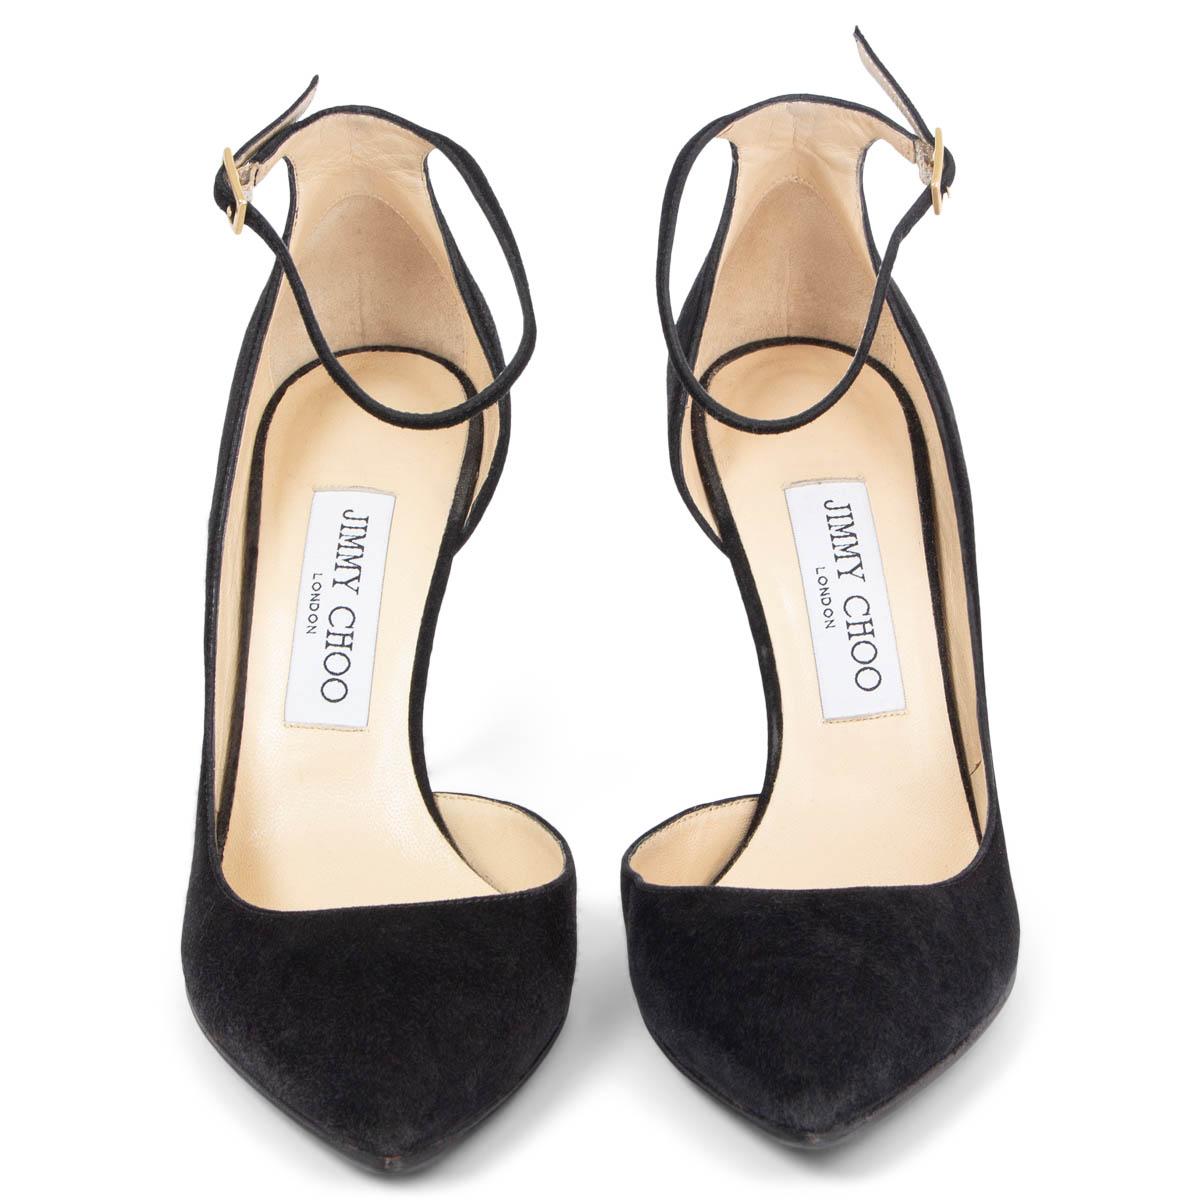 100% authentic Jimmy Choo Lucy pointed-toe ankle-strap pumps in black suede. Have been worn once inside and are in virtually new condition. Black rubber sole has been added. 

Measurements
Imprinted Size	37.5
Shoe Size	37.5
Inside Sole	24.5cm